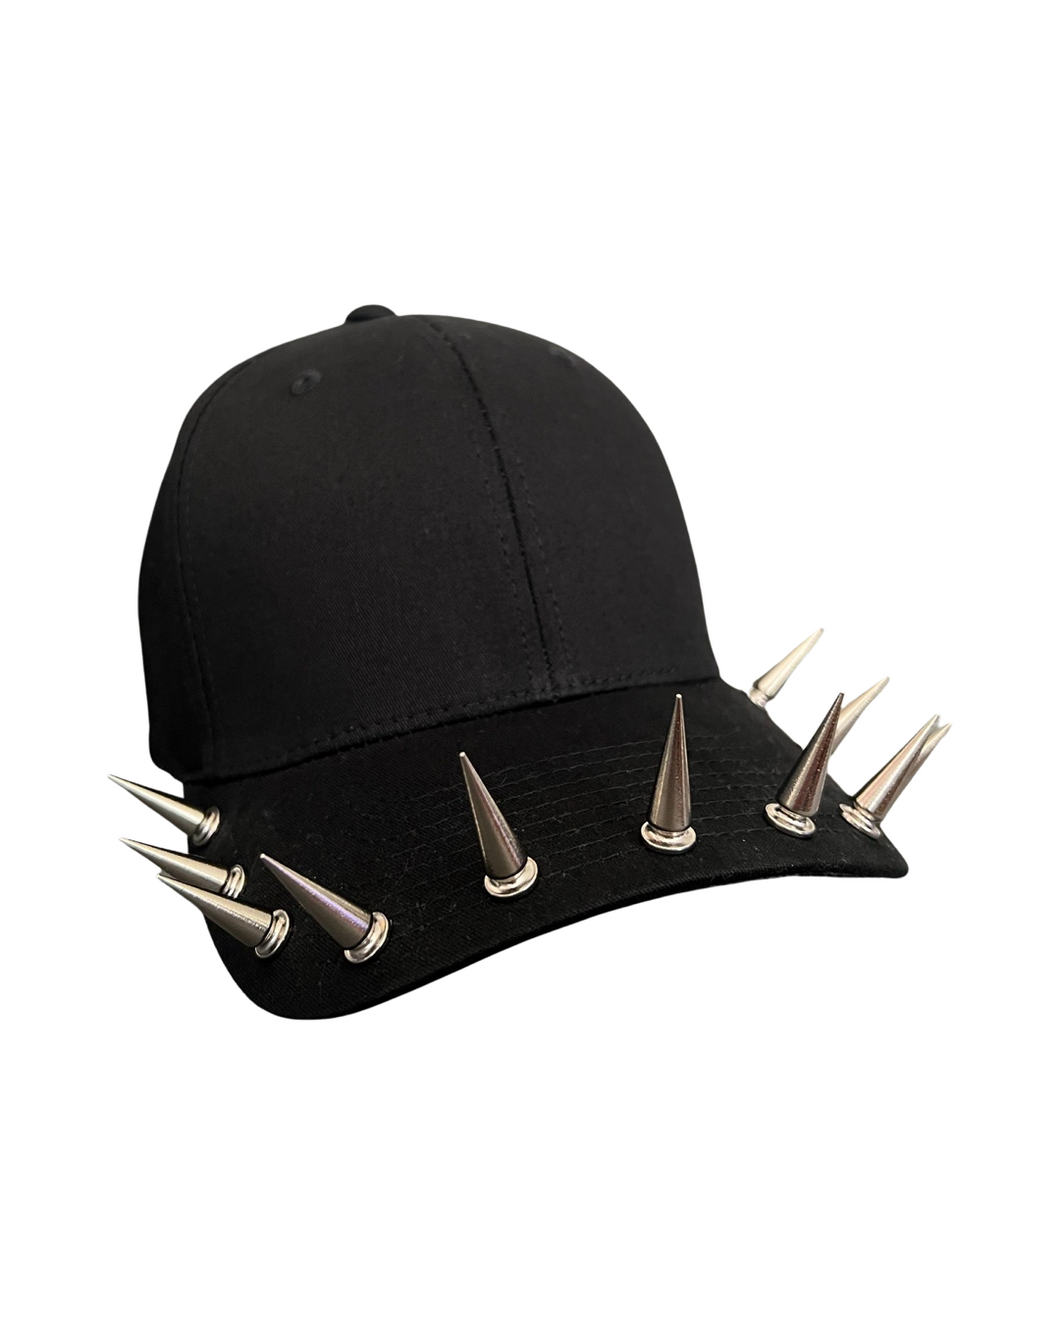 Studmuffin NYC East Side Cap - Tall Tree Spikes